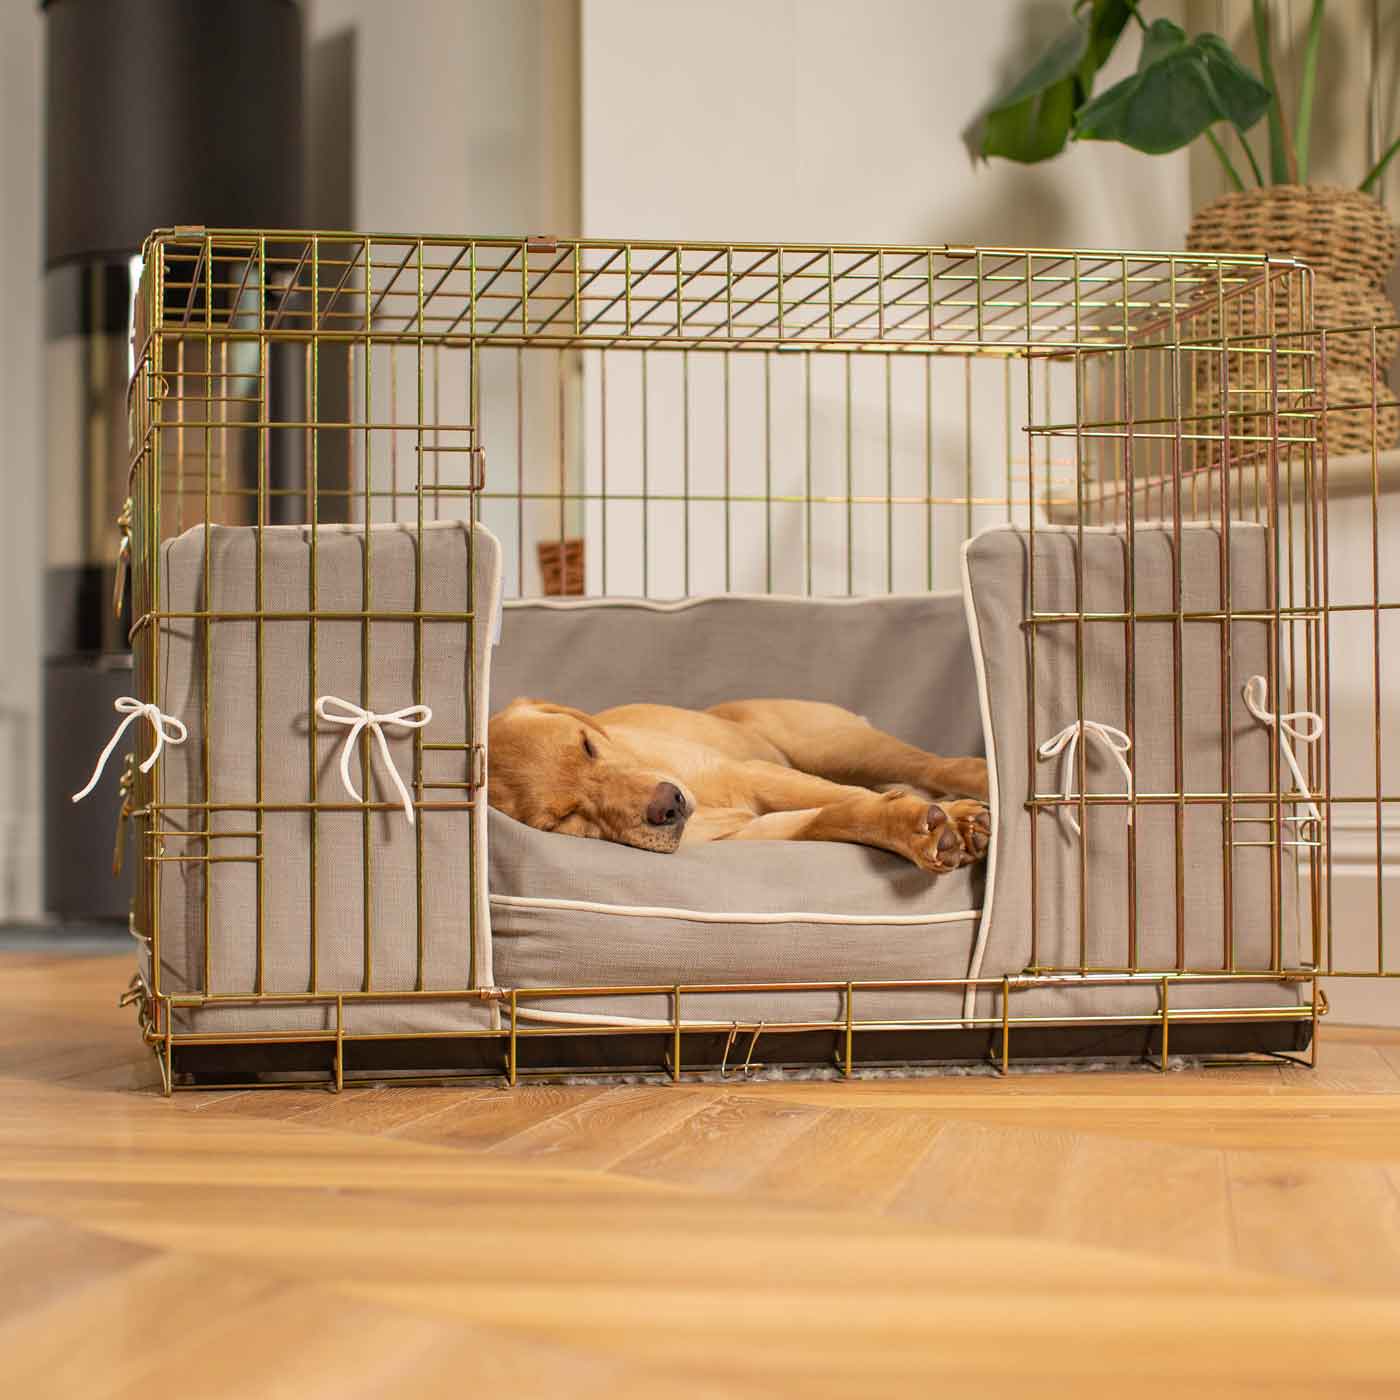 Dog Cage Bumper in Savanna Stone by Lords & Labradors